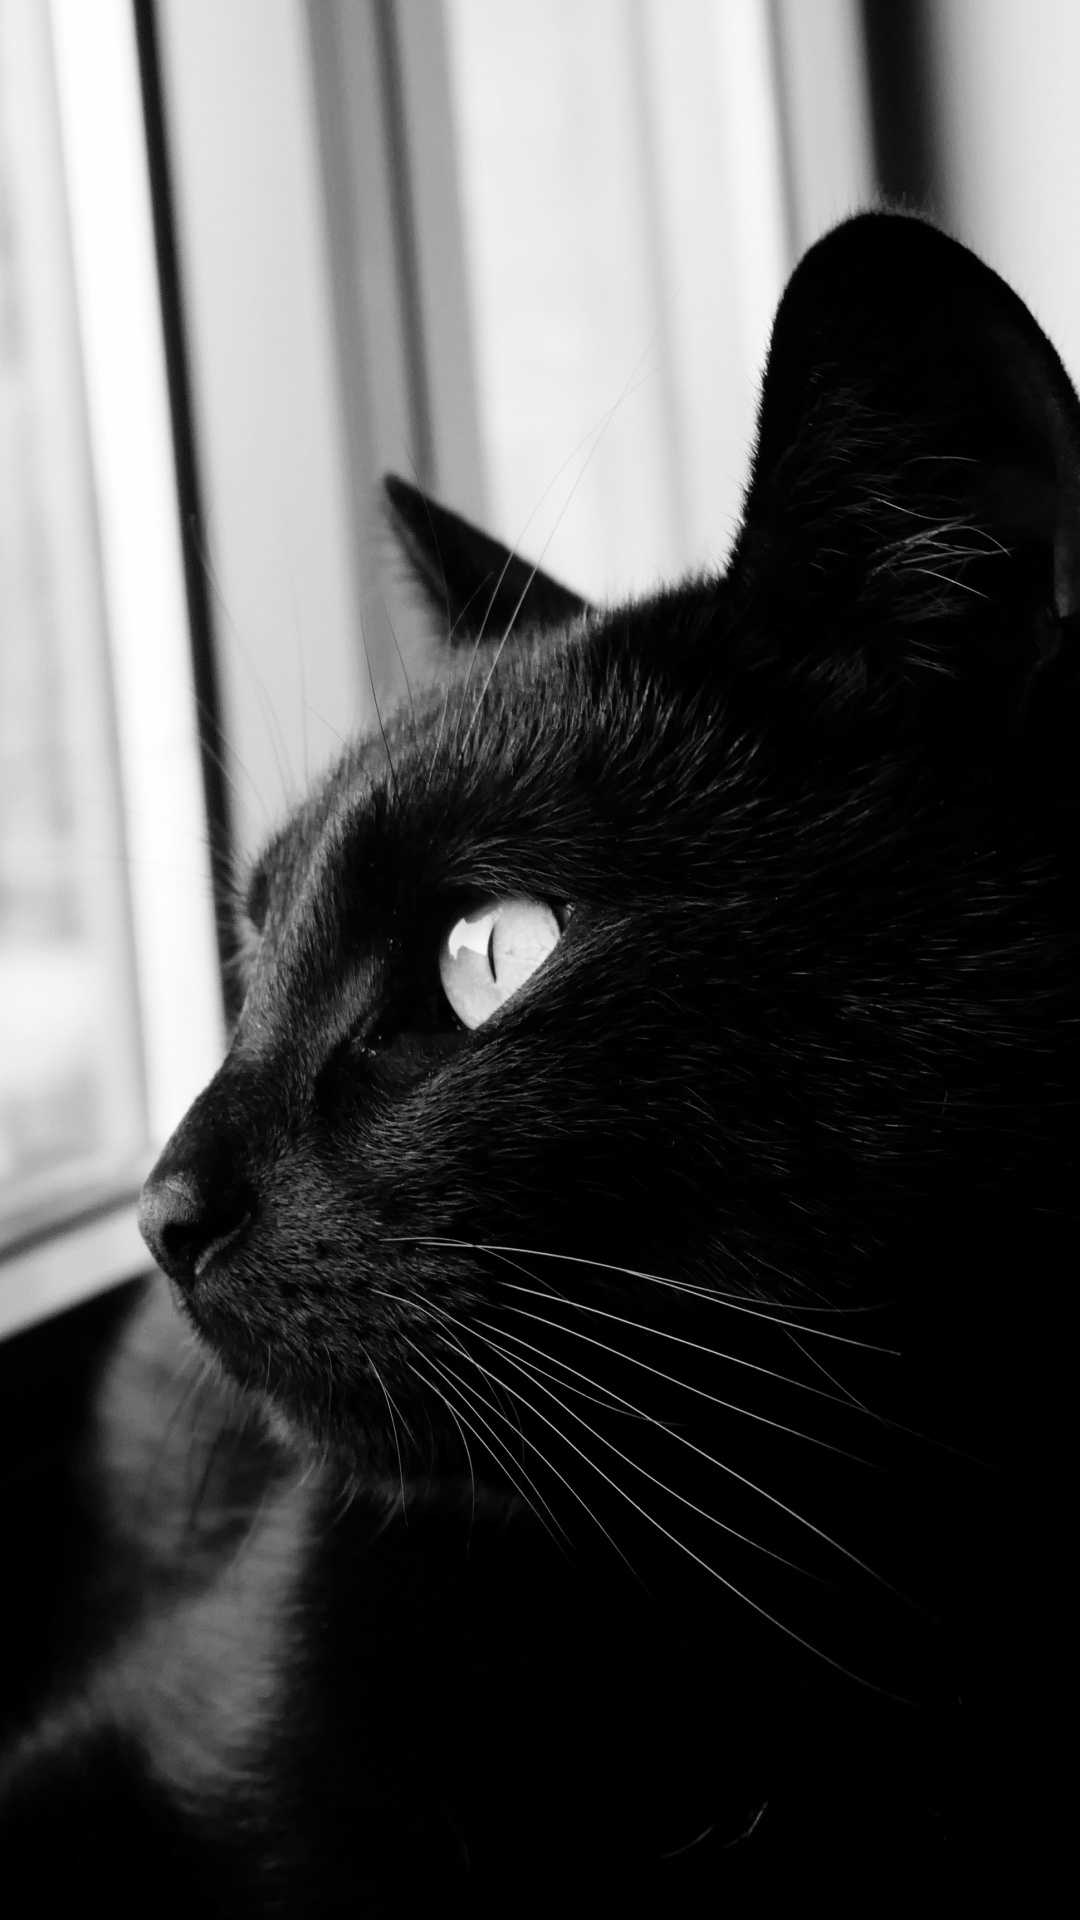 Black Cat Looking at The Window. Wallpaper in 1080x1920 Resolution